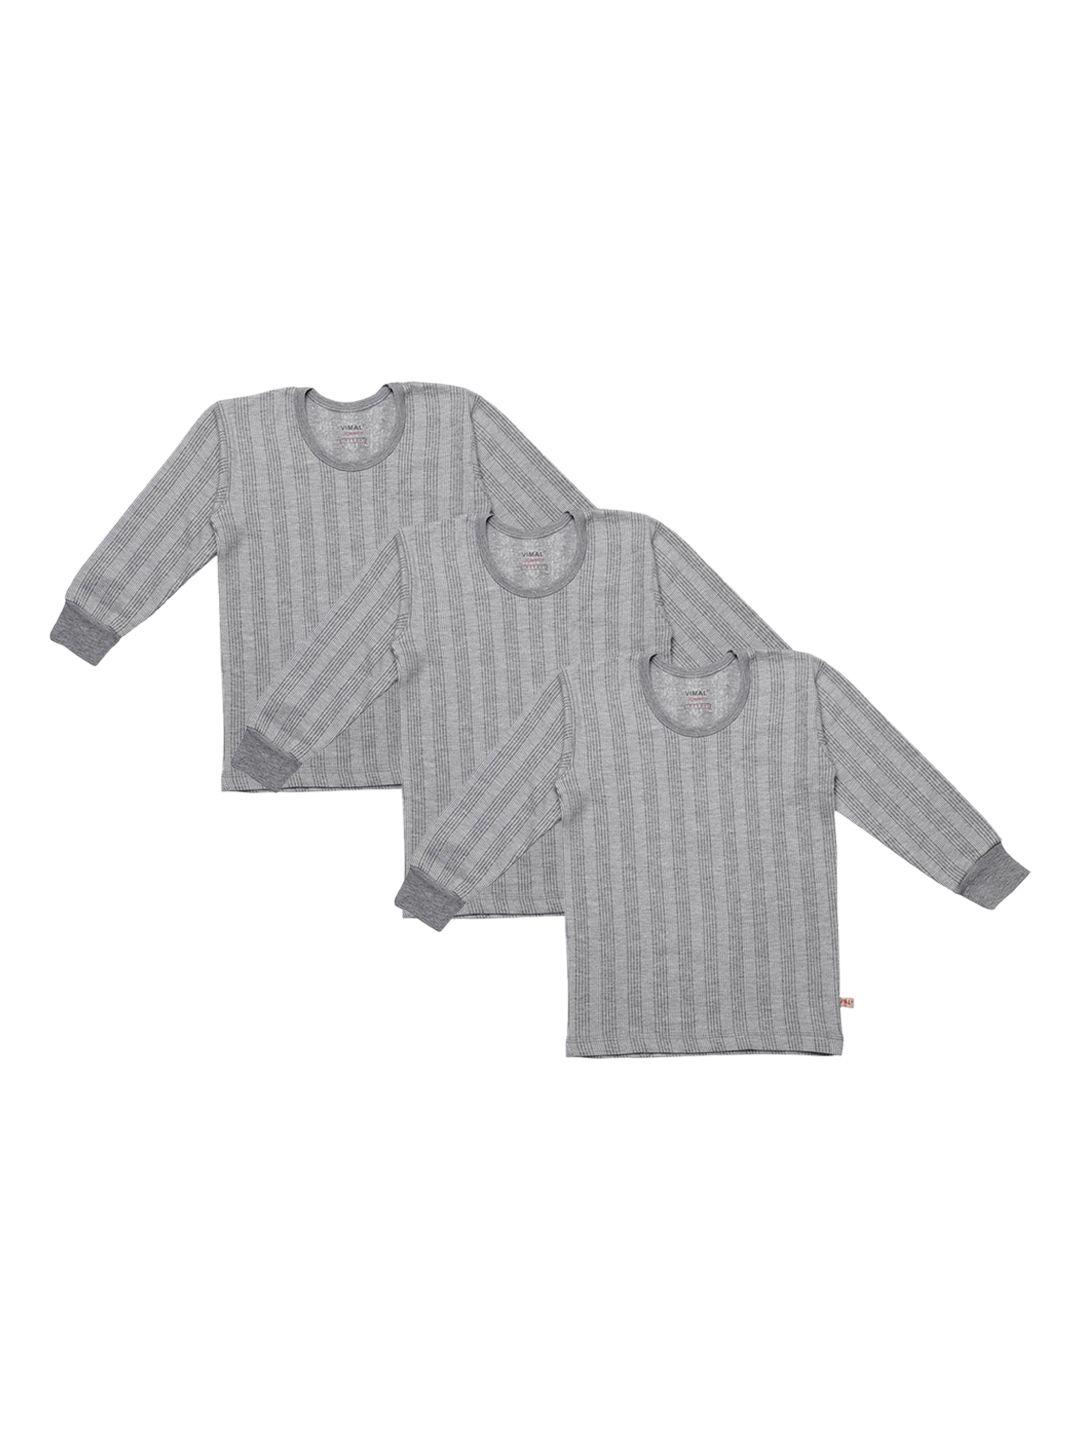 vimal jonney infant kids pack of 3 striped cotton thermal tops